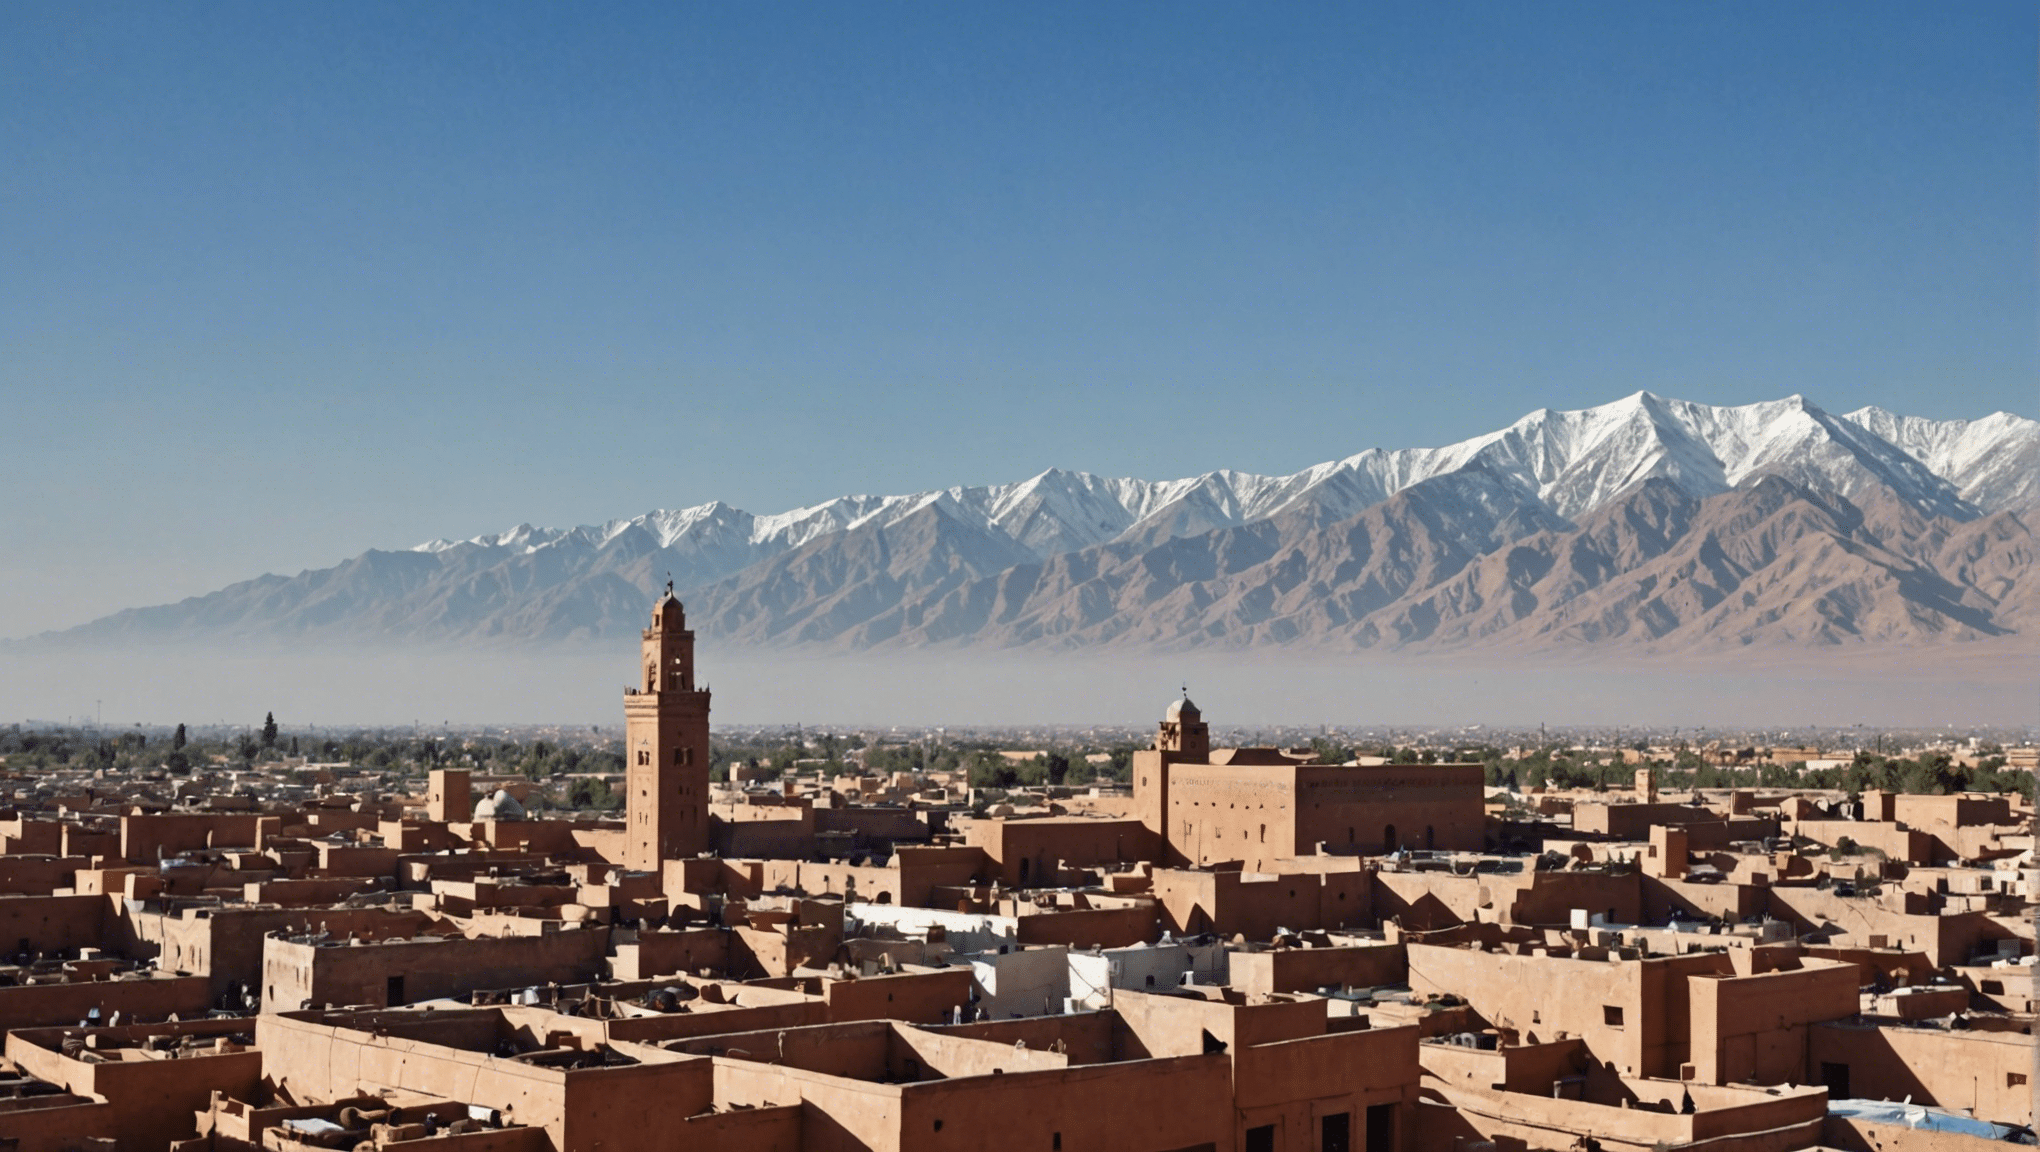 find out what the weather is like in marrakech in march with our informative guide. plan your trip with confidence using our detailed weather forecast for march in marrakech.